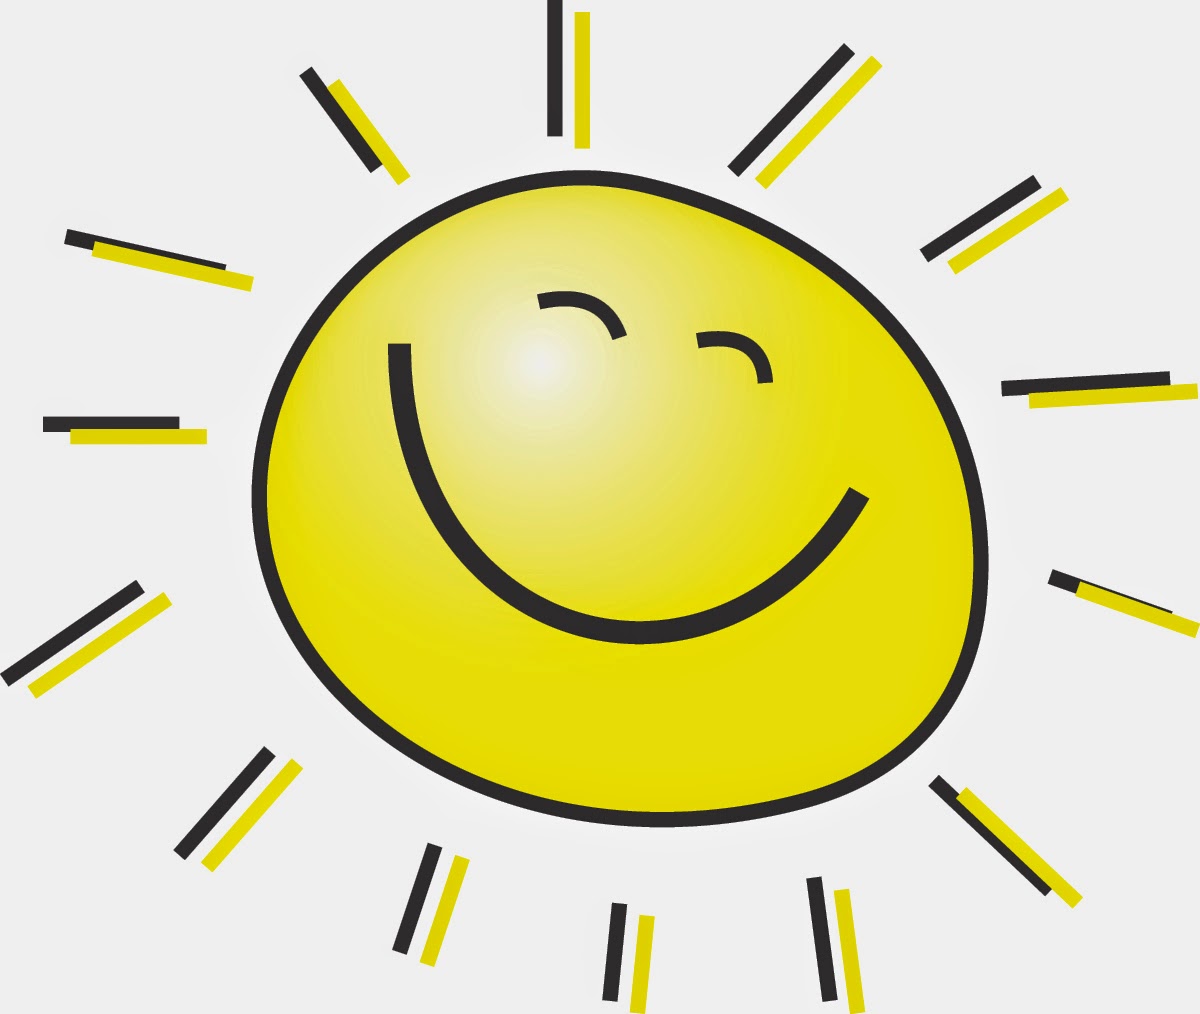 Cheerful sun in graphic representation free image download